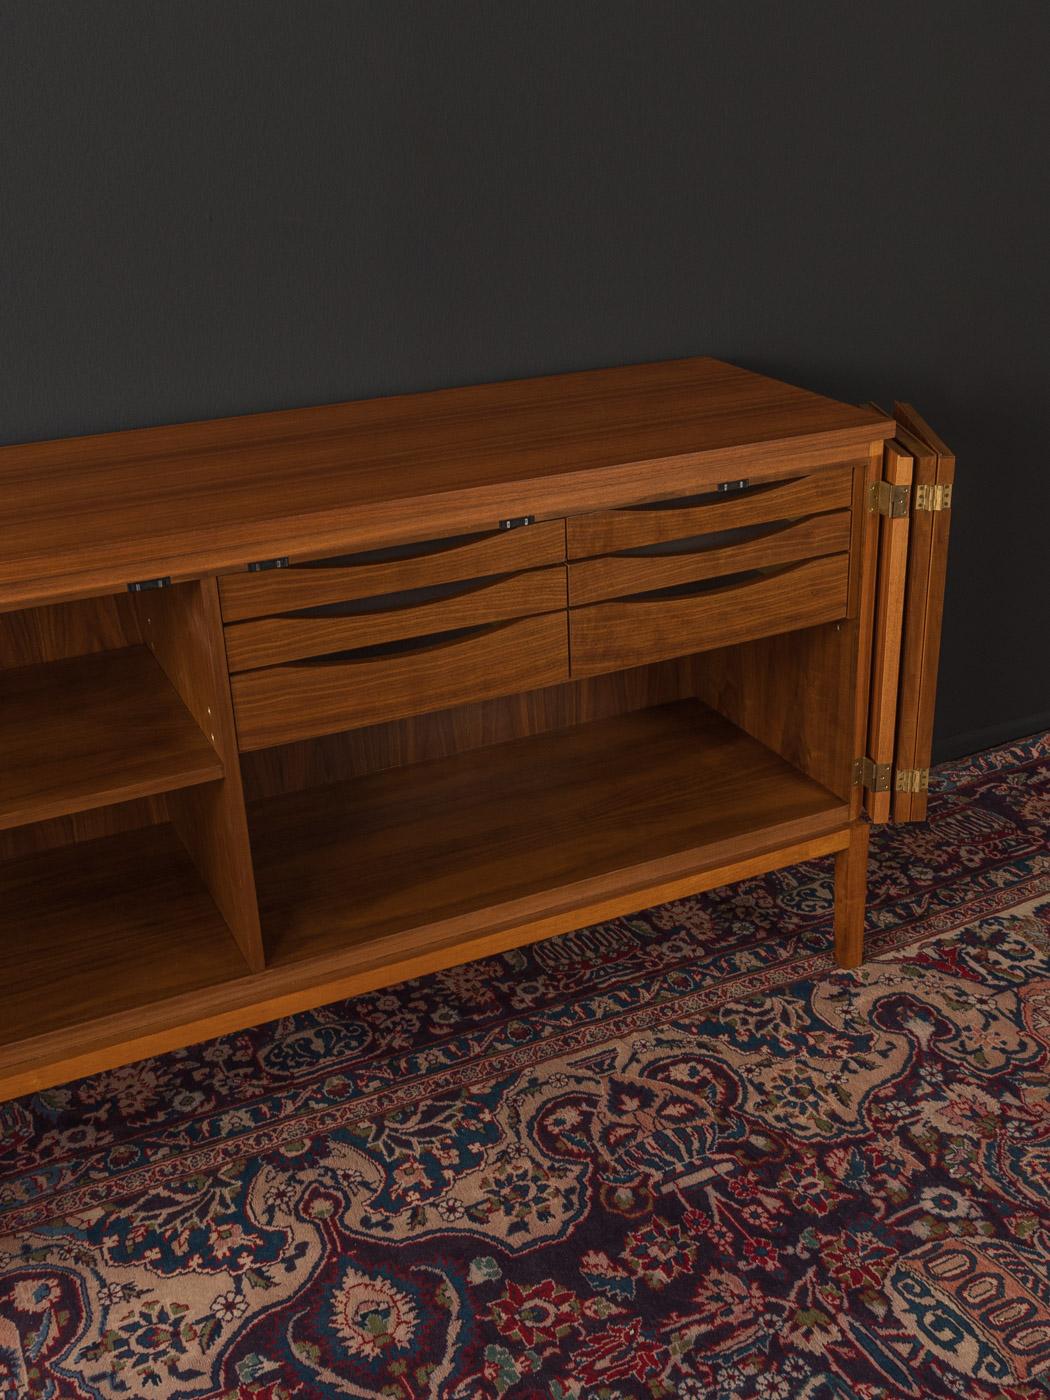 Wk Möbel Sideboard from the 1950s Designed by Paul McCobb, Made in Germany 3